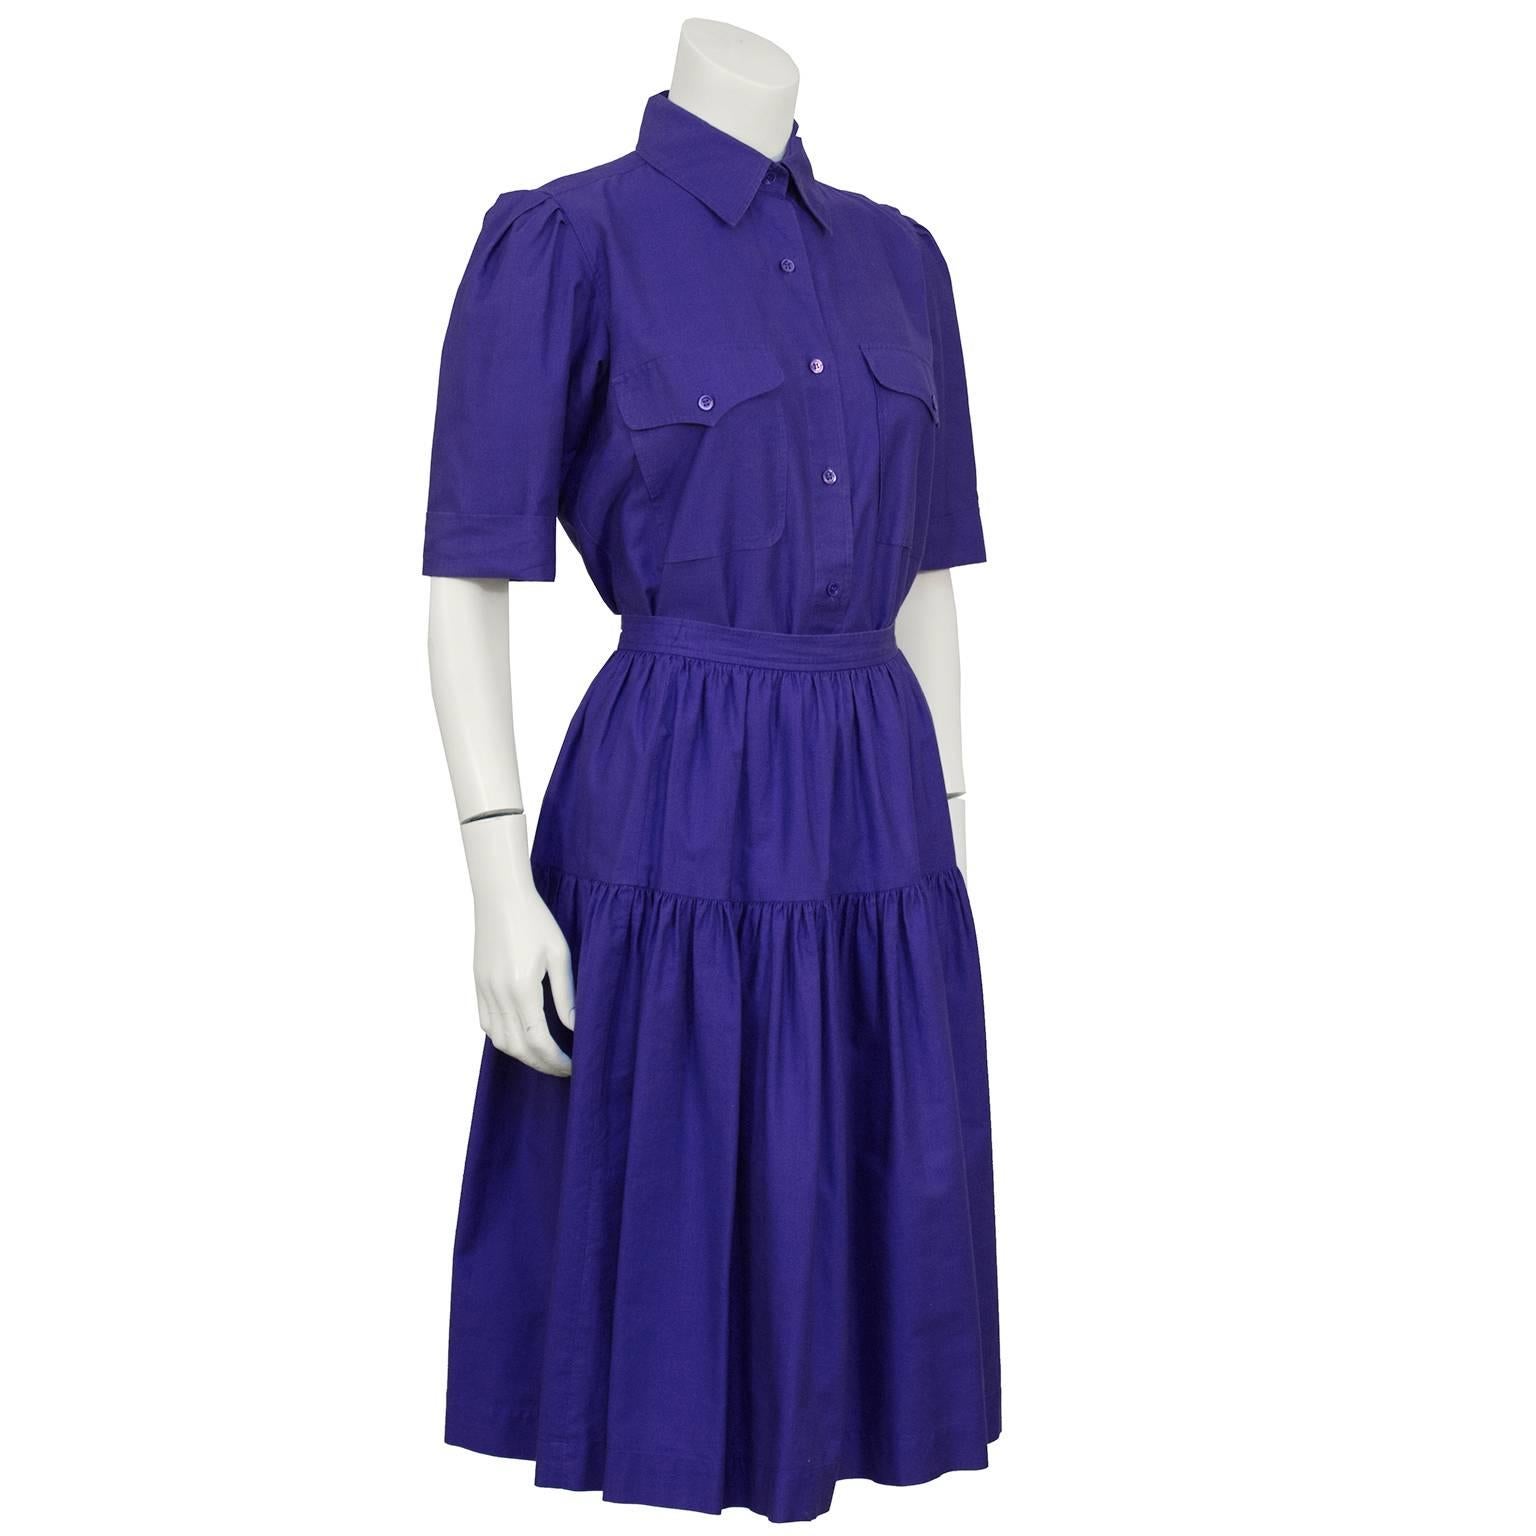 Purple cotton YSL skirt and button down ensemble from the 1970's. Collared shirt with small purple buttons down the front, top flap pockets on the bust and short sleeves. Yoke on the back, sleeves can be cuffed. Skirt has a banded waist, one tier